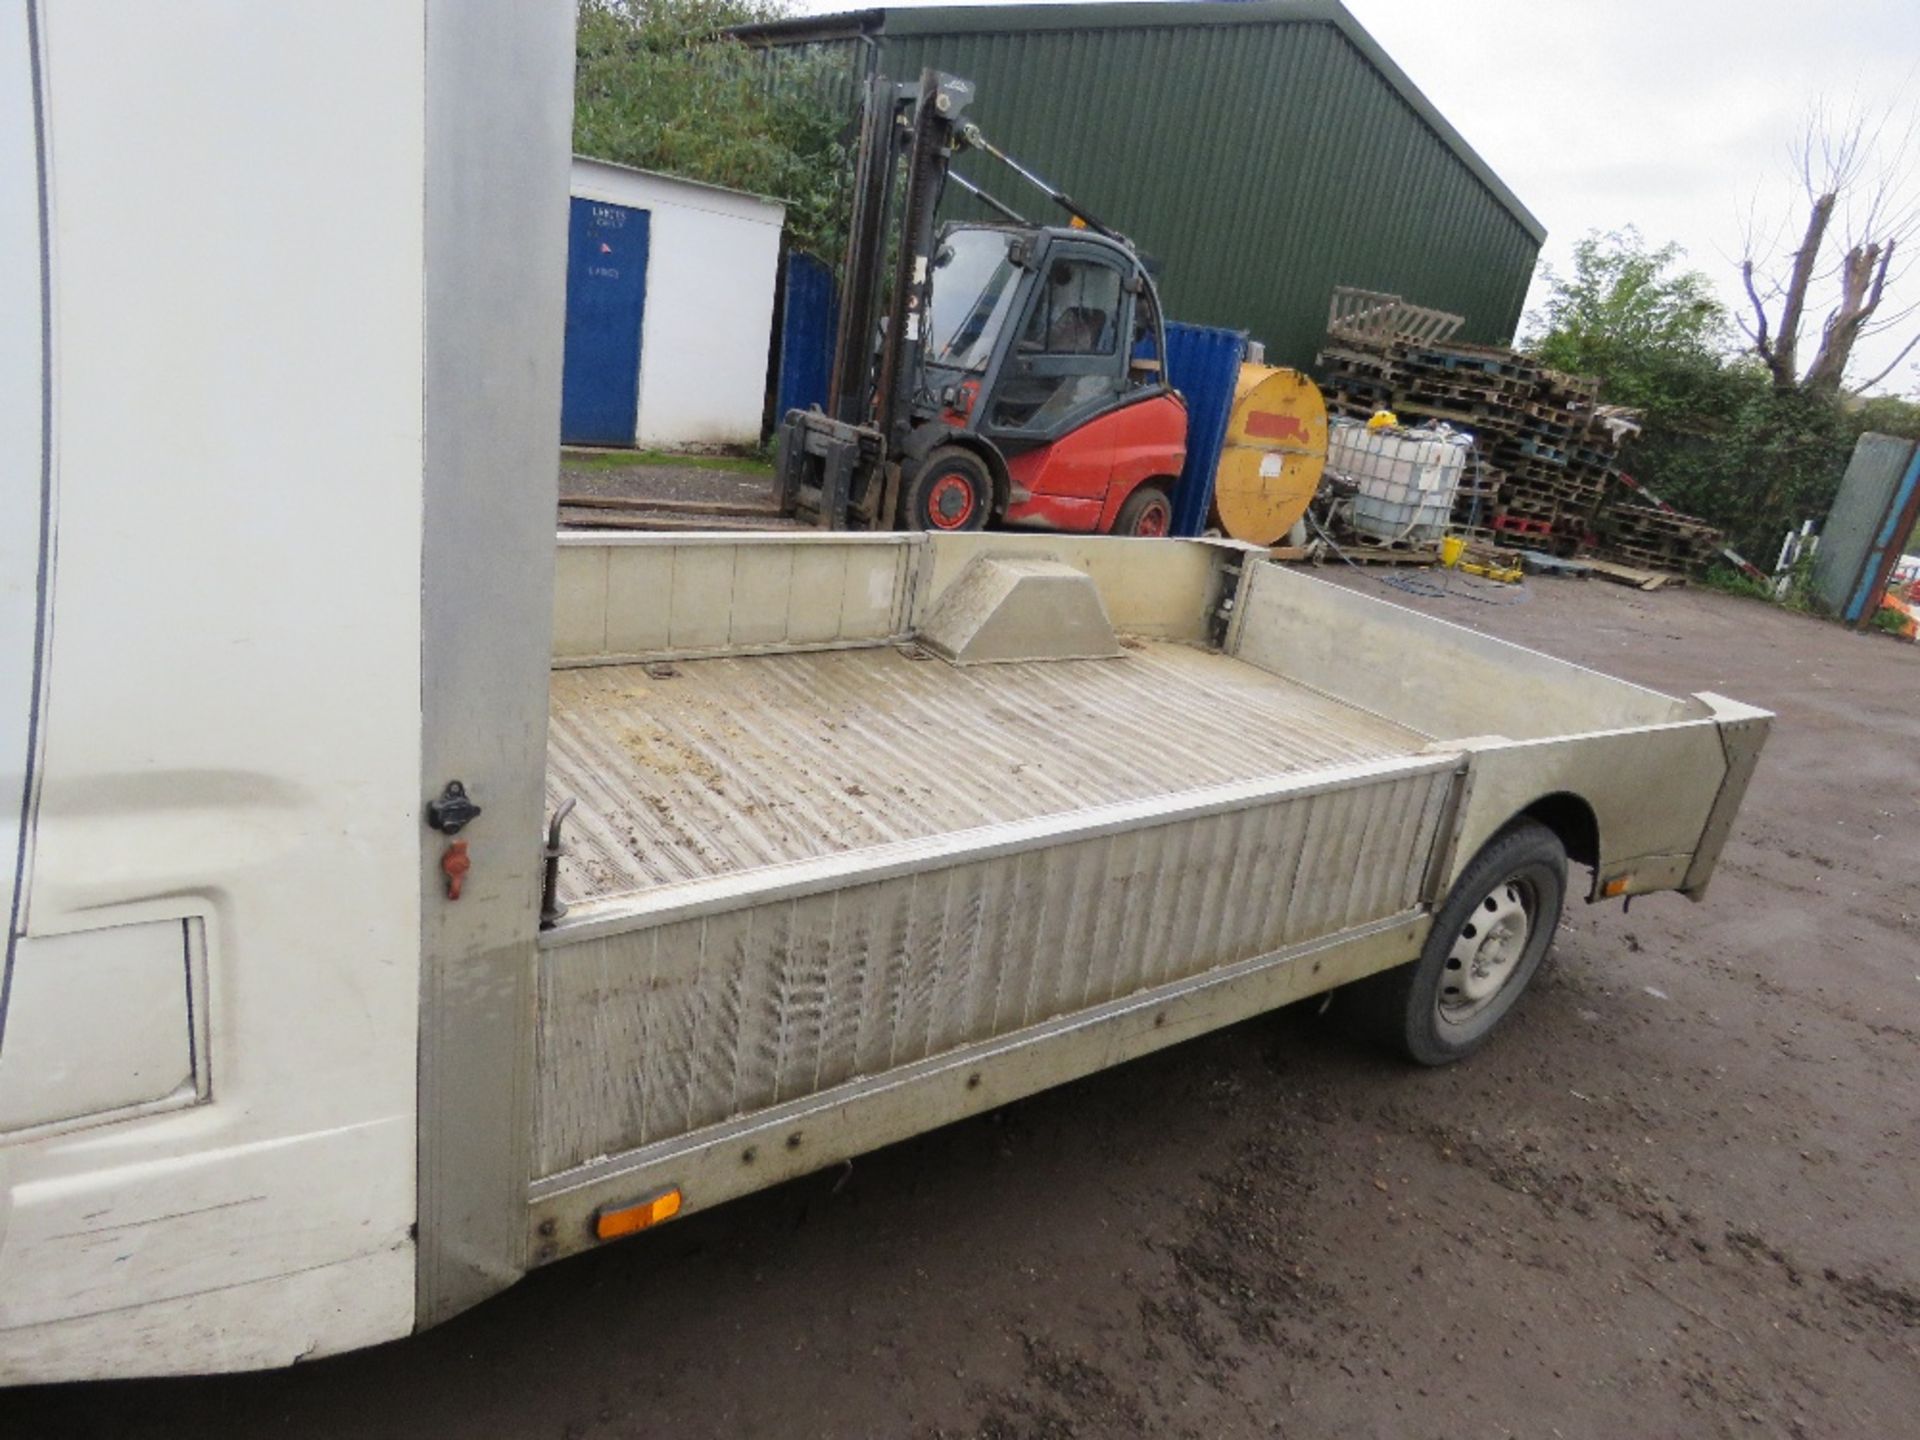 CITROEN LOW BED PLANT TRUCK, REG:BX14 OVP. 3500KG RATED WITH RAMPS. 125,870 REC MILES. WITH V5, MOT - Image 5 of 13